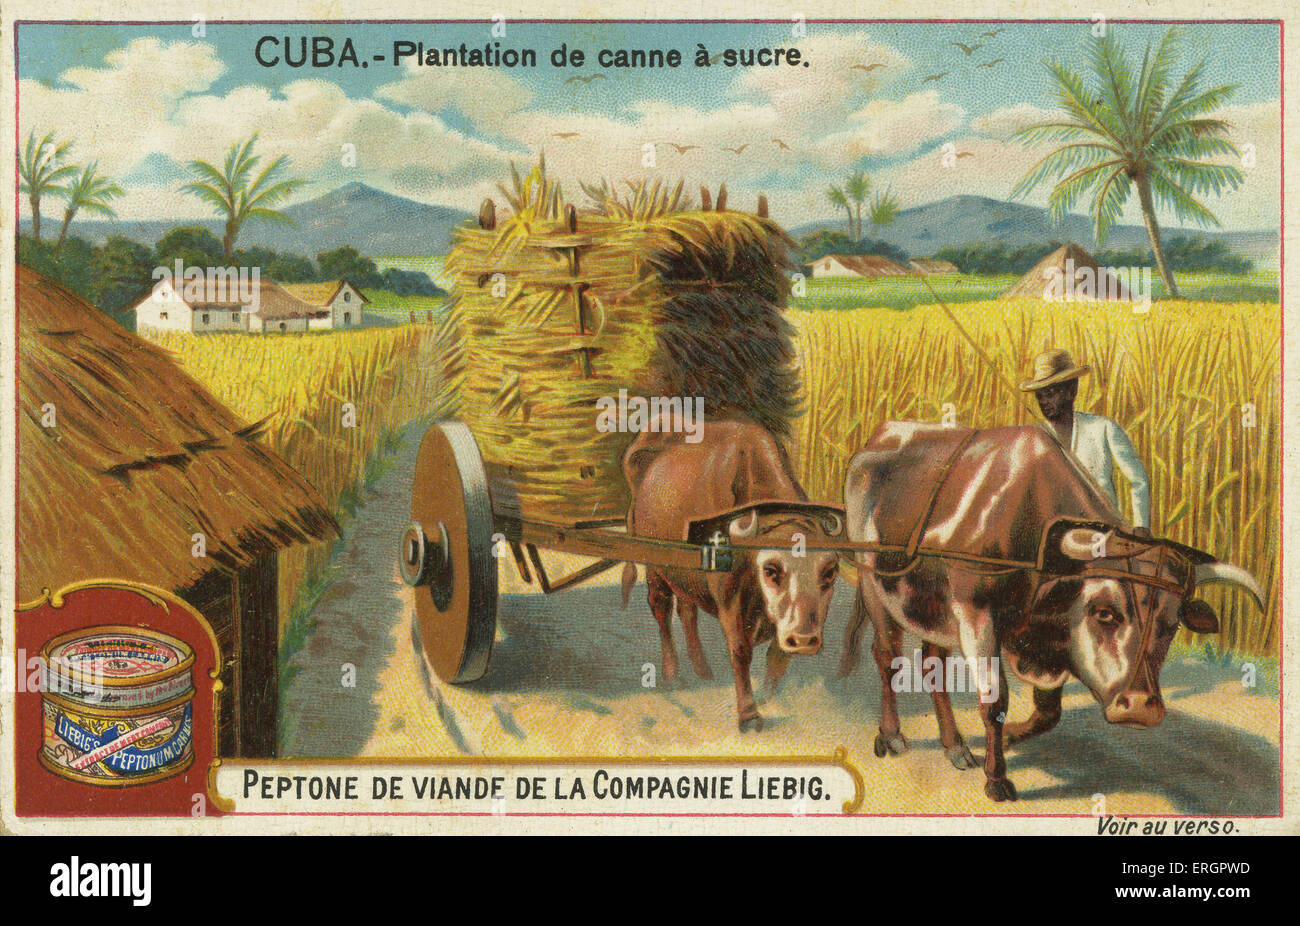 Sugar Plantation, Cuba, 19th century. Farmer drives oxen pulling a cart laden with sugar cane. From a recipe card for Liebig 's Stock Photo